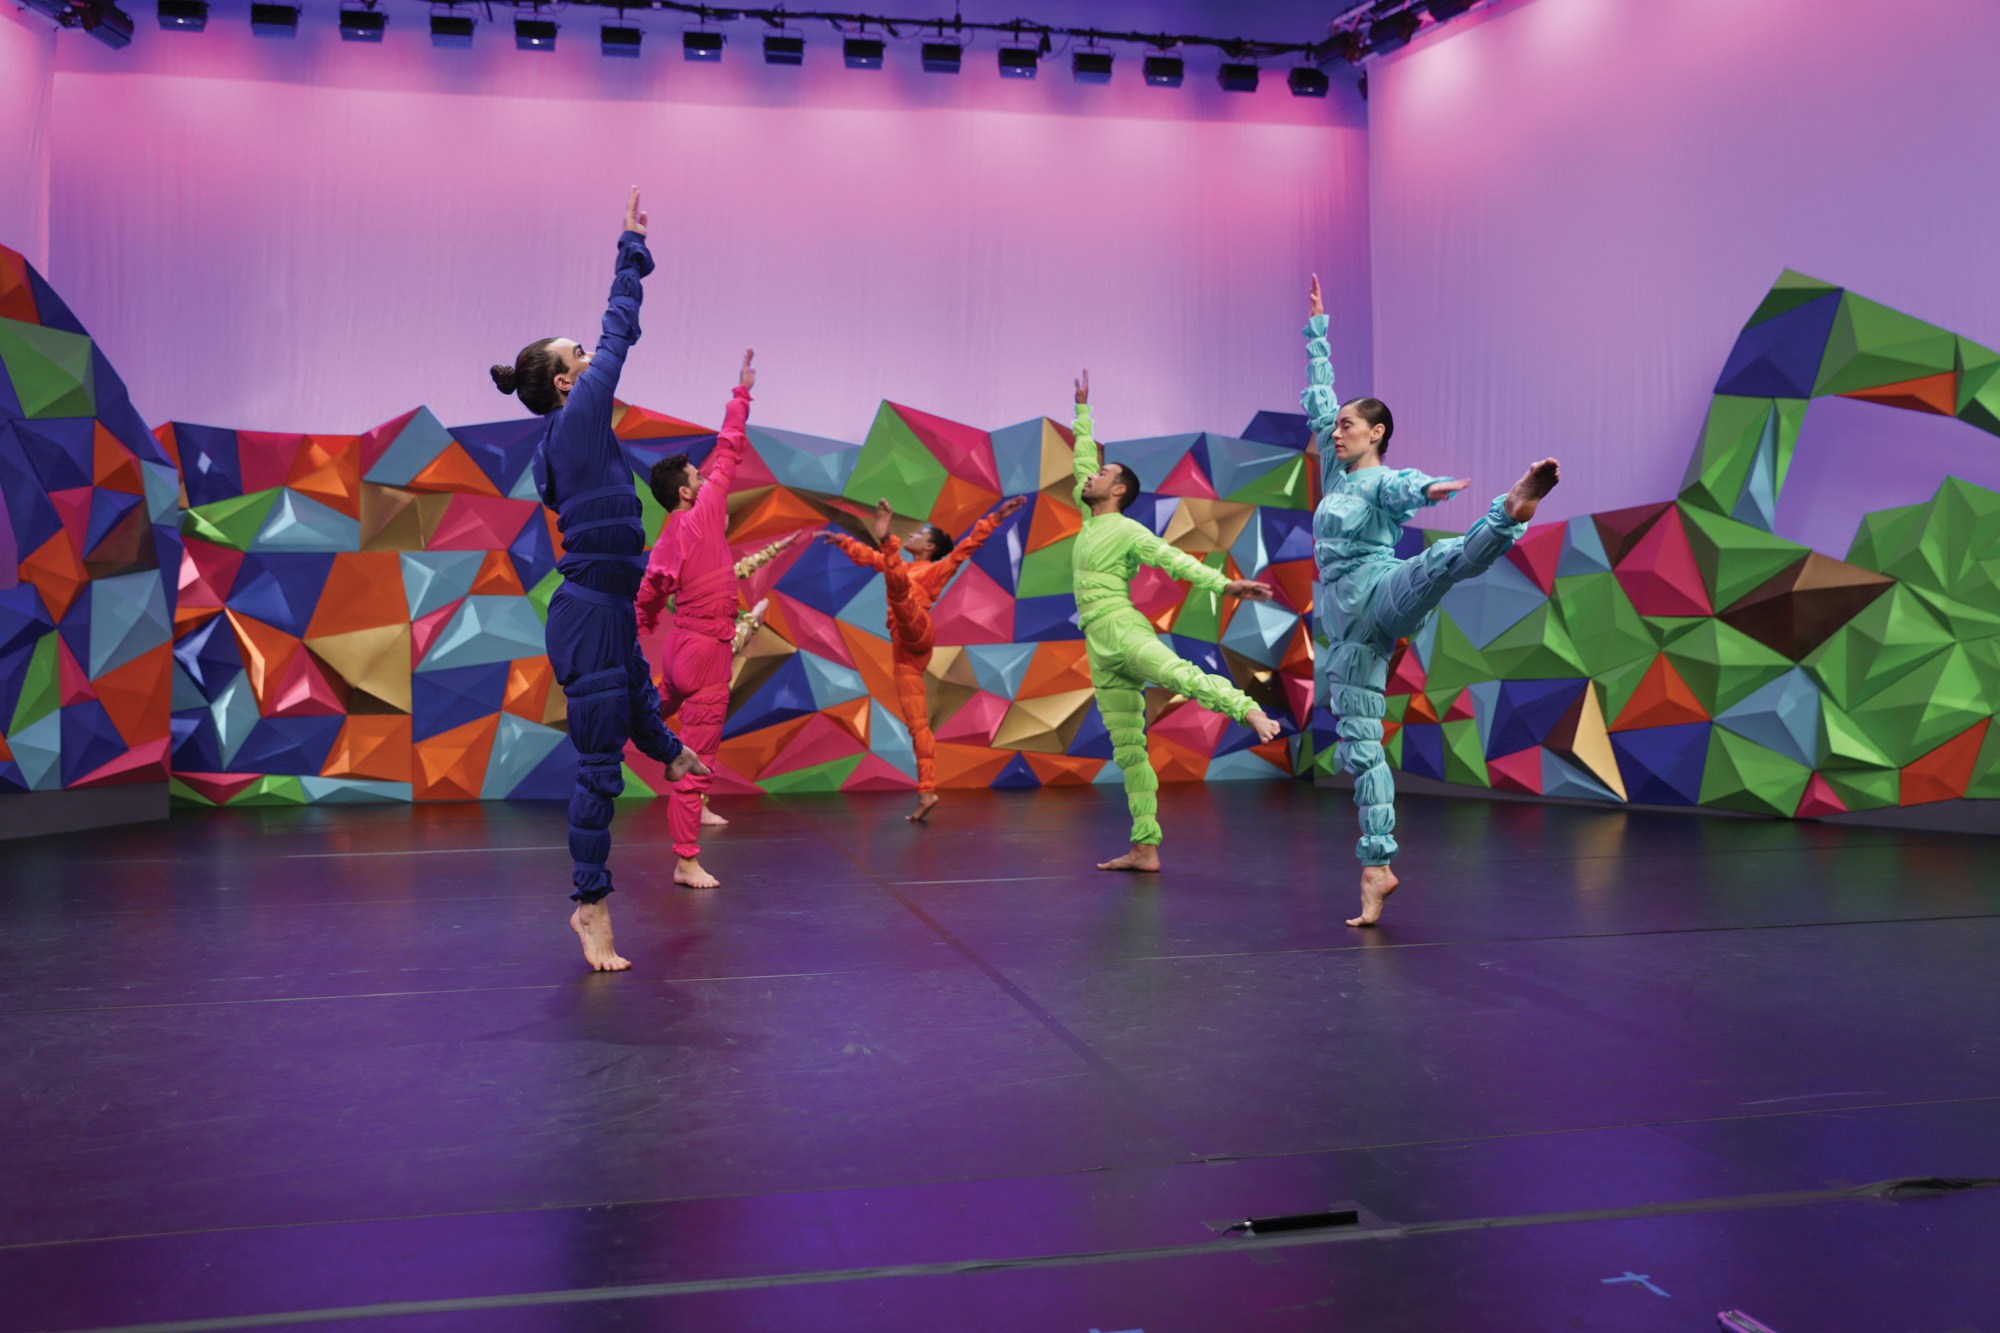 Five dancers in purple, pink, orange, lime green, teal outfits dancing in front of colorful geometric wall 